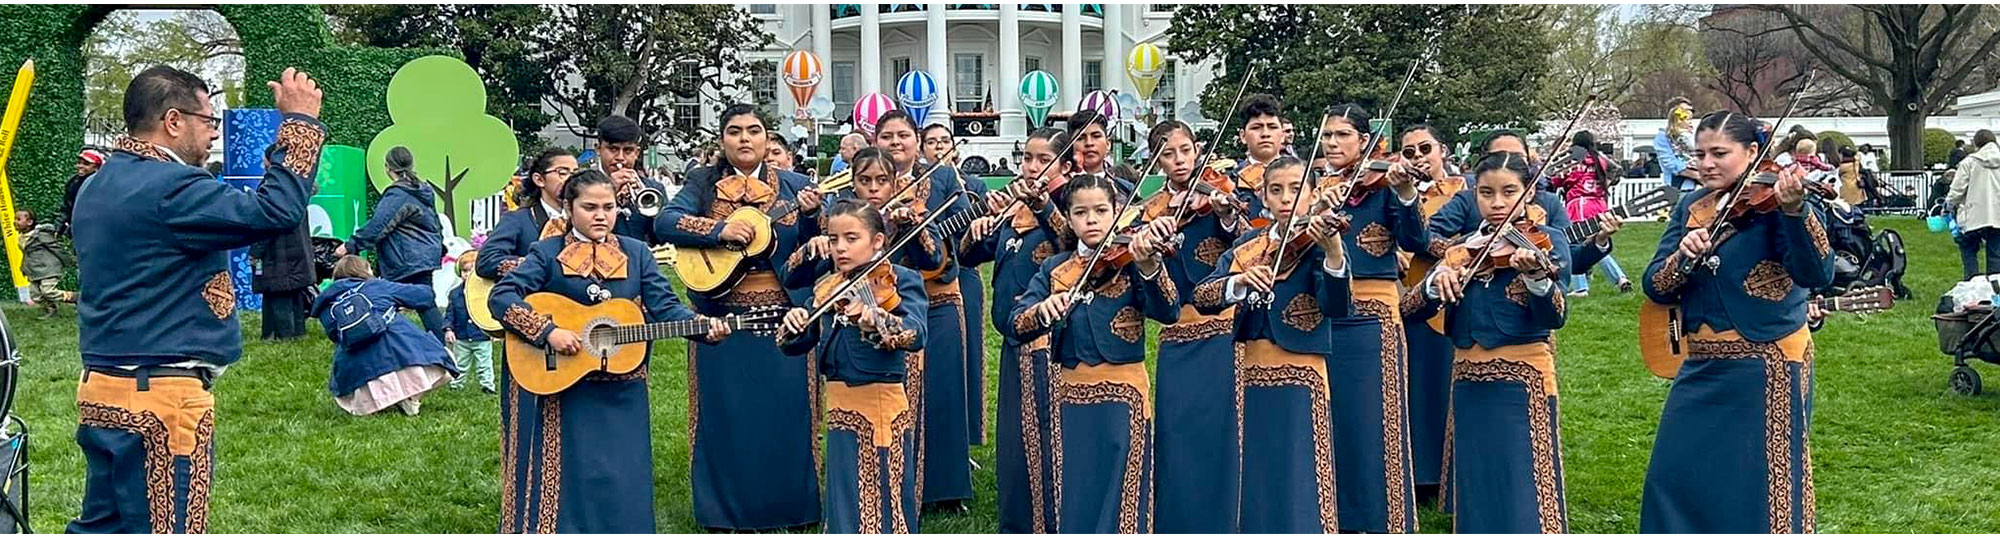 Mariachi students playing in front of the White House